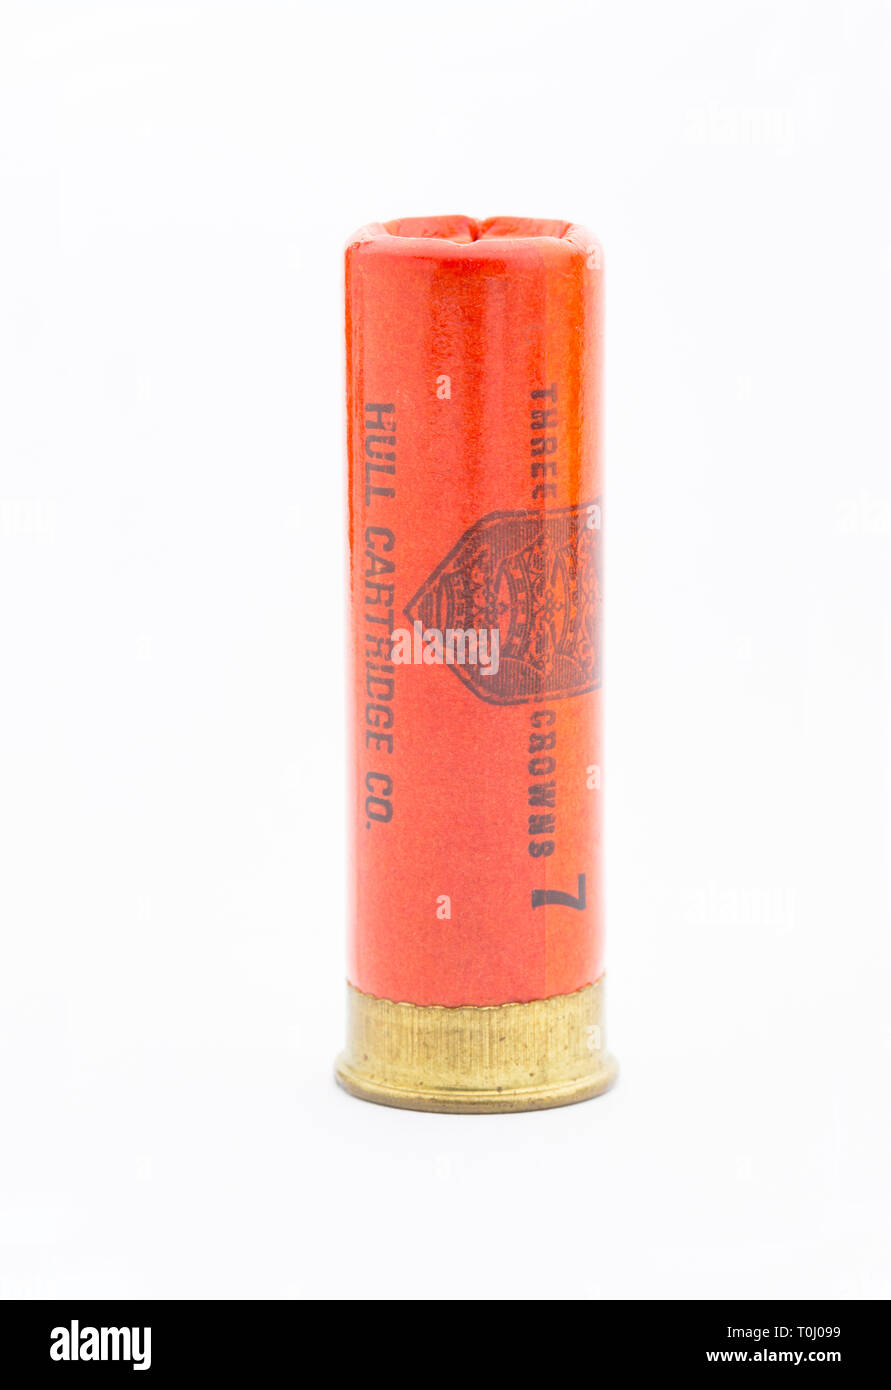 A Hull Cartridge Co. paper cased 20 gauge, or bore, shotgun cartridge loaded with No 7 lead shot. Collecting shotgun cartridges is a hobby that can be Stock Photo